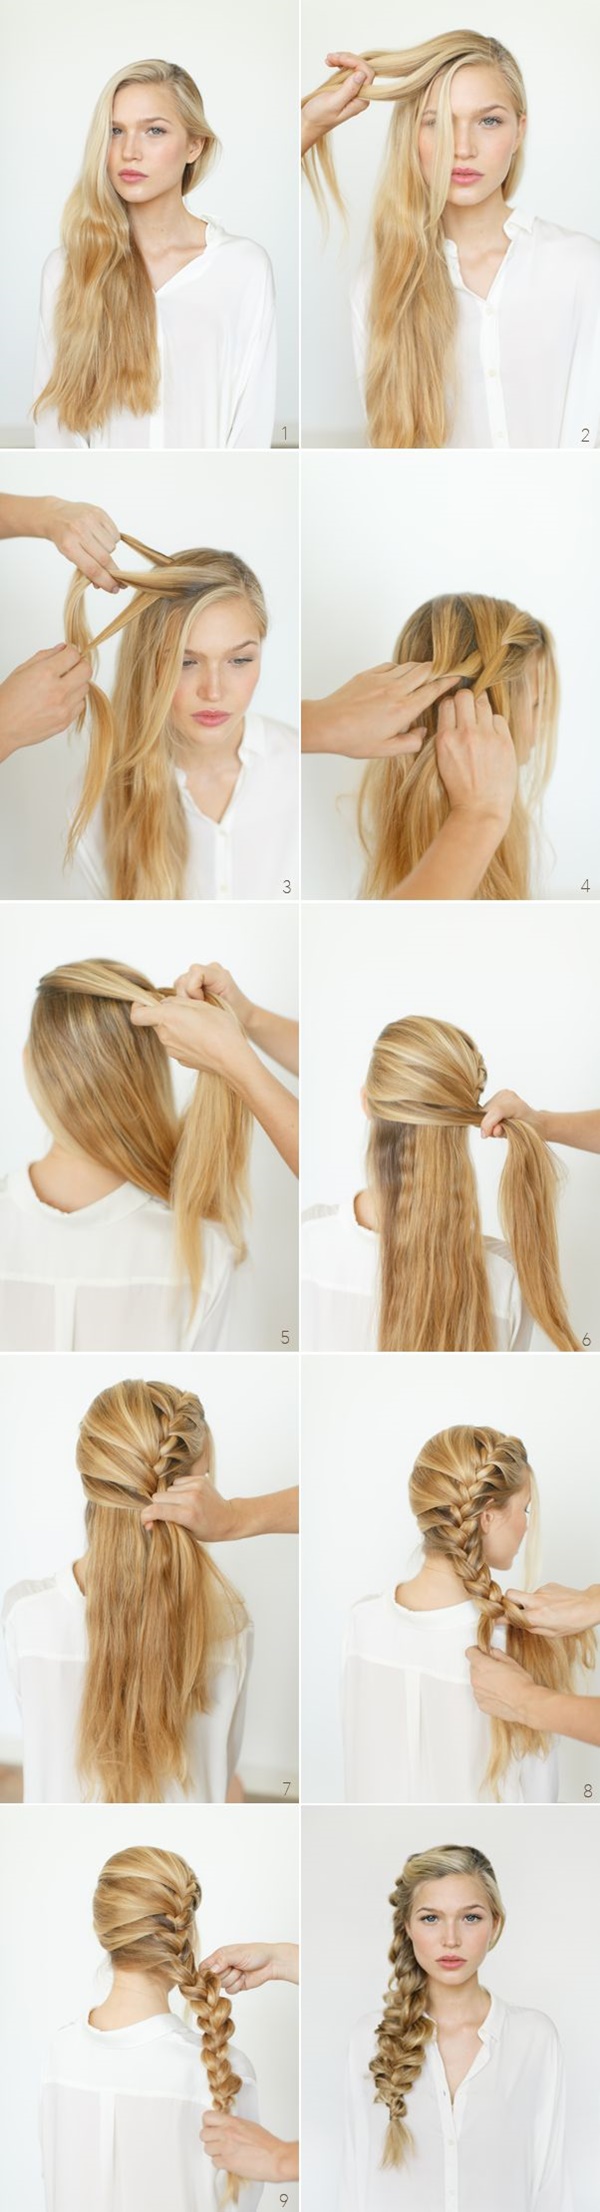 braided hairstyles for long hair (76)